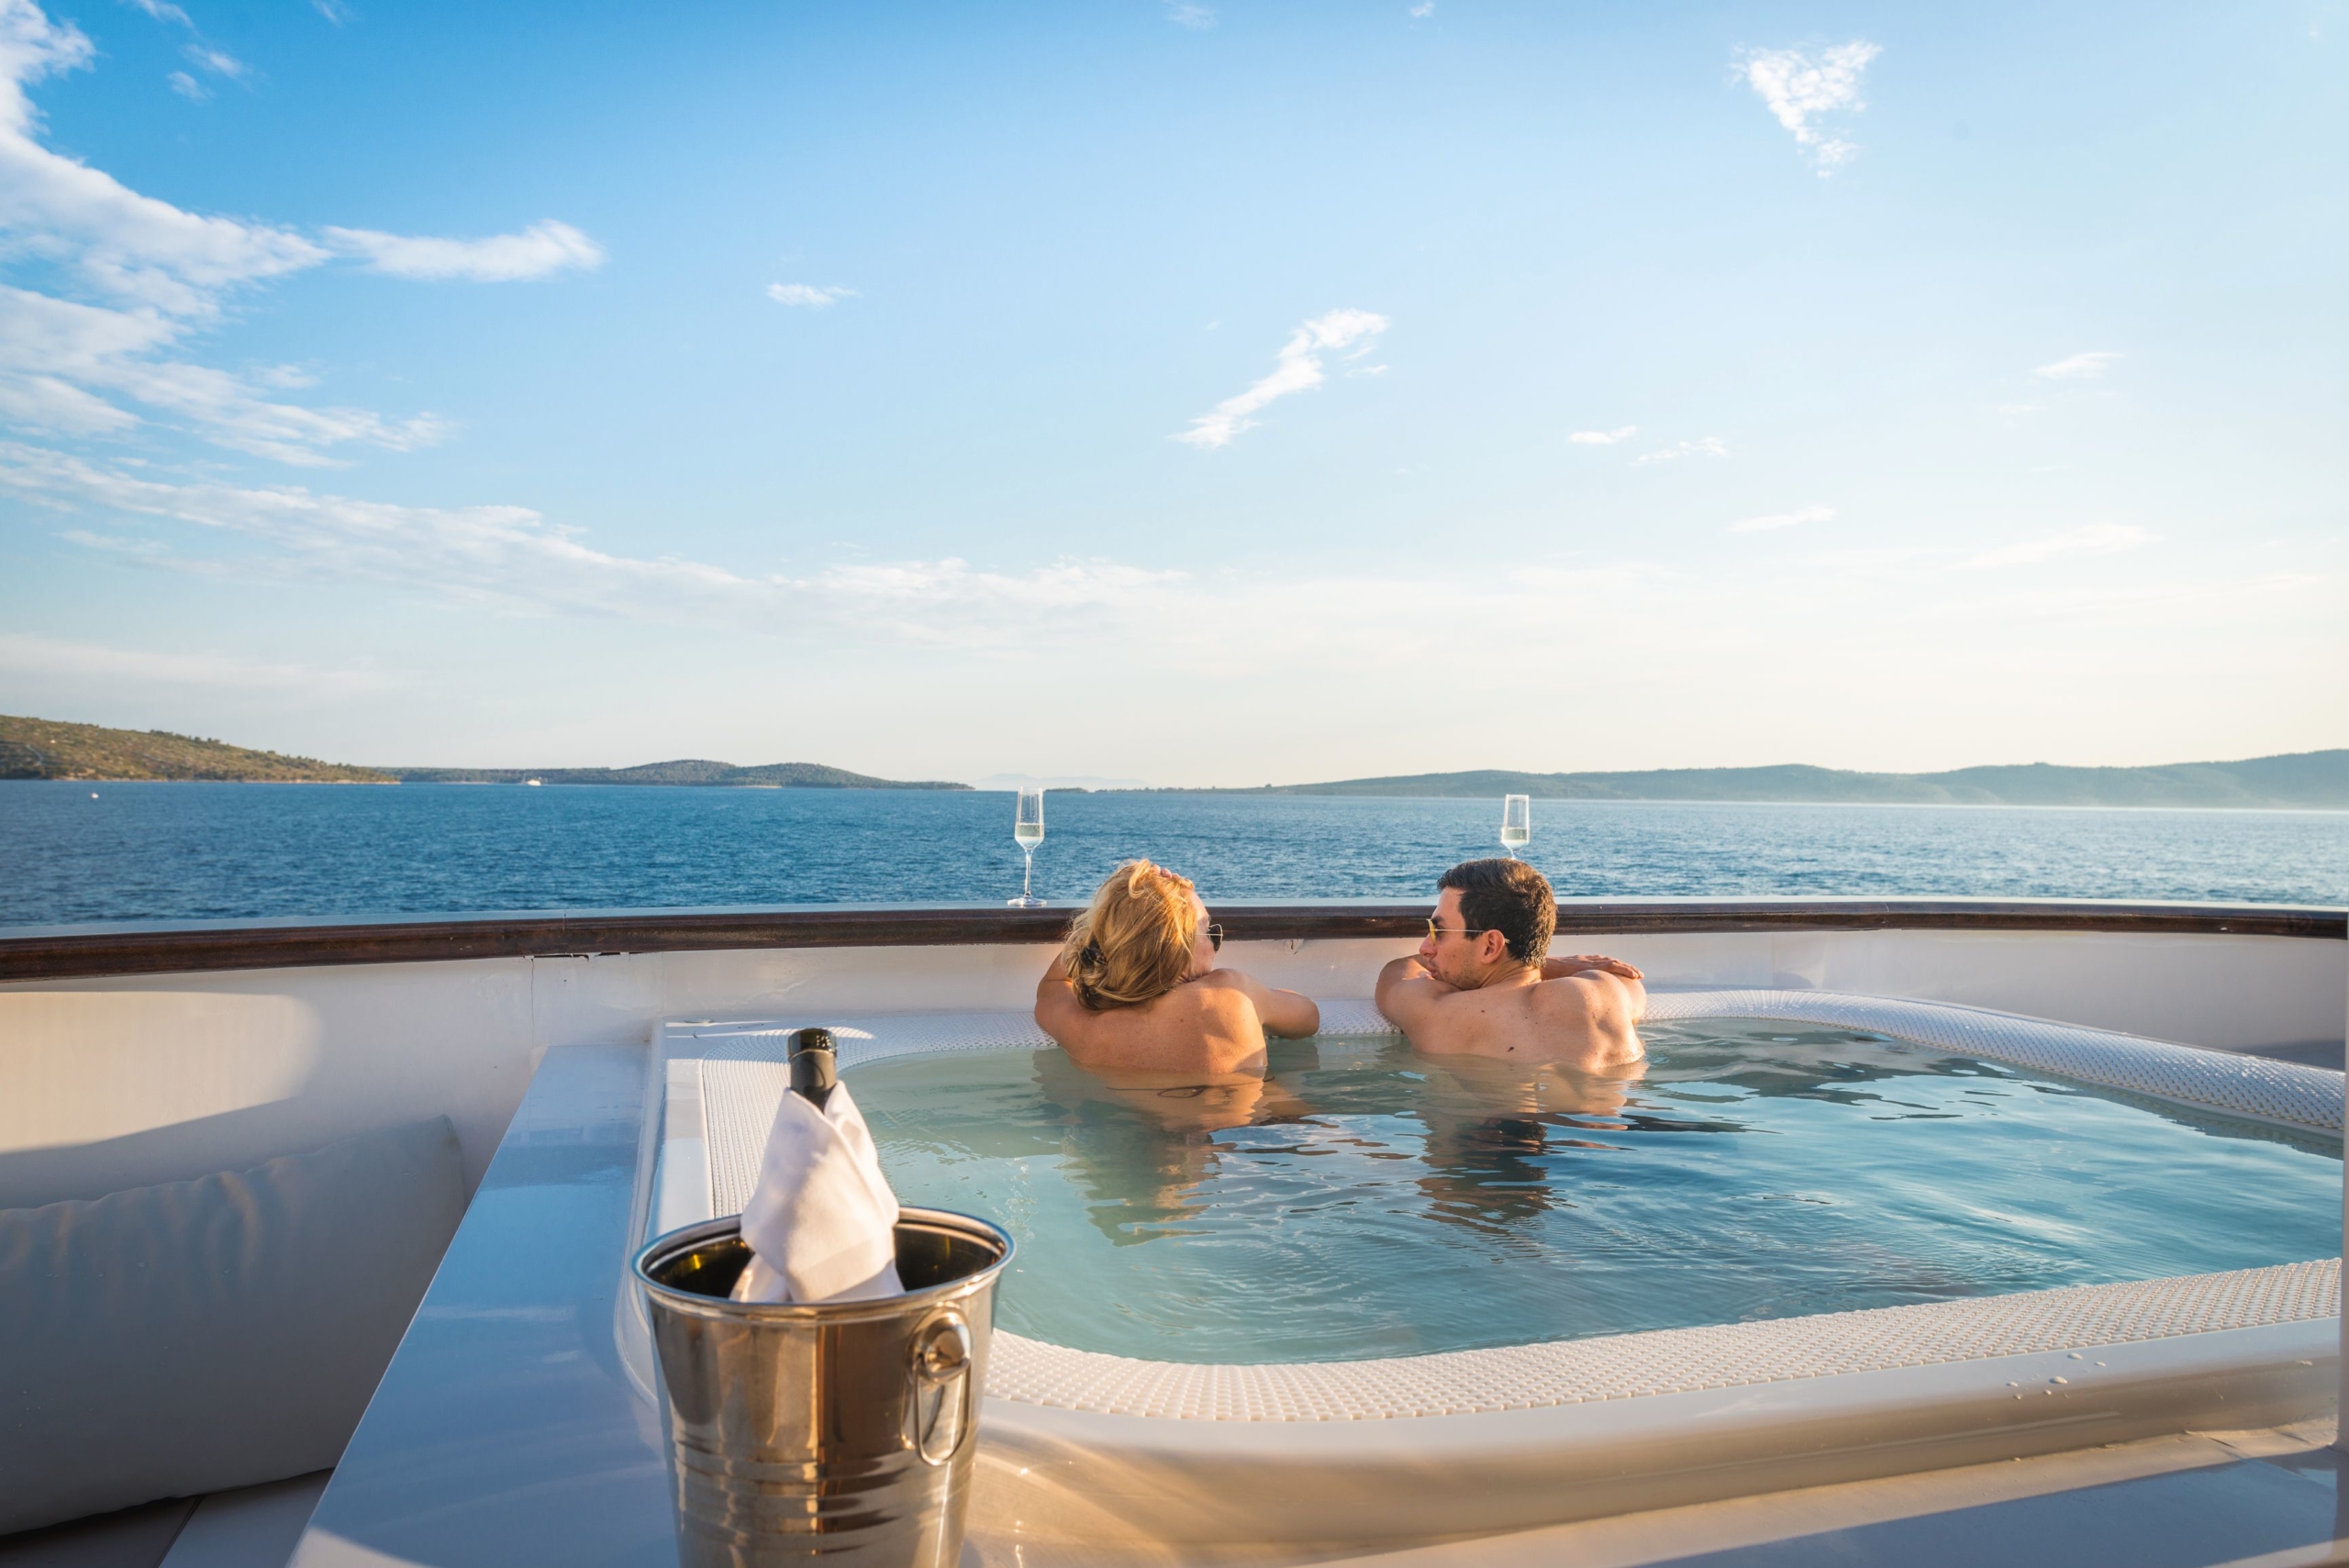 What can you expect on your yachting trip? Prepare to dine on delicious catered meals, and unwind in your personal hot tub while you cruise around beautiful islands and beaches along Croatia's Adriatic coastline. 